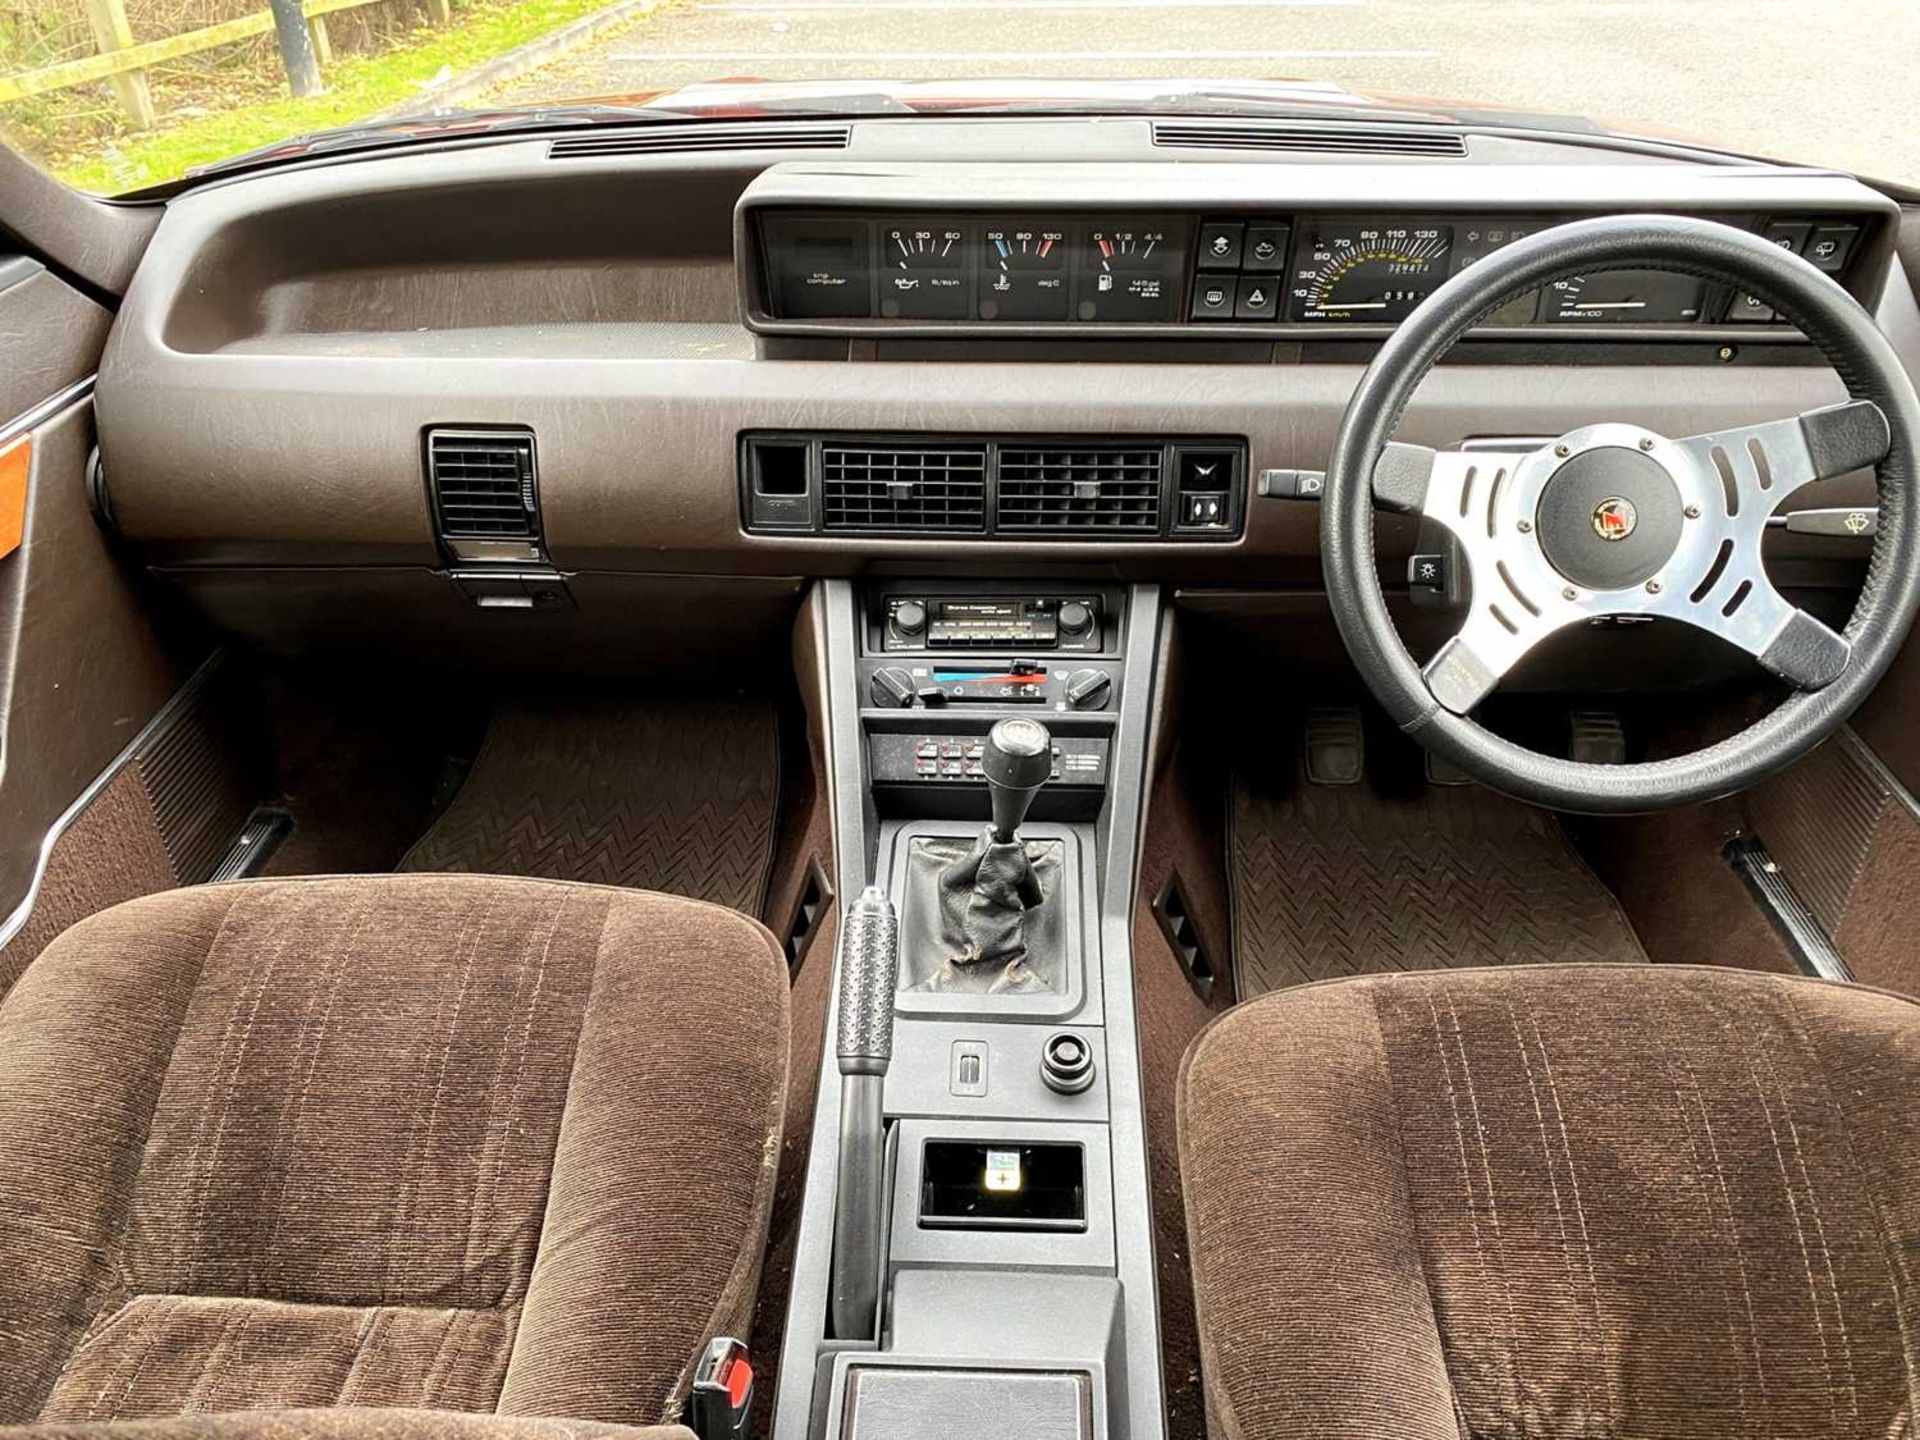 1982 Rover SD1 3500 SE Only 29,000 miles - Image 32 of 100